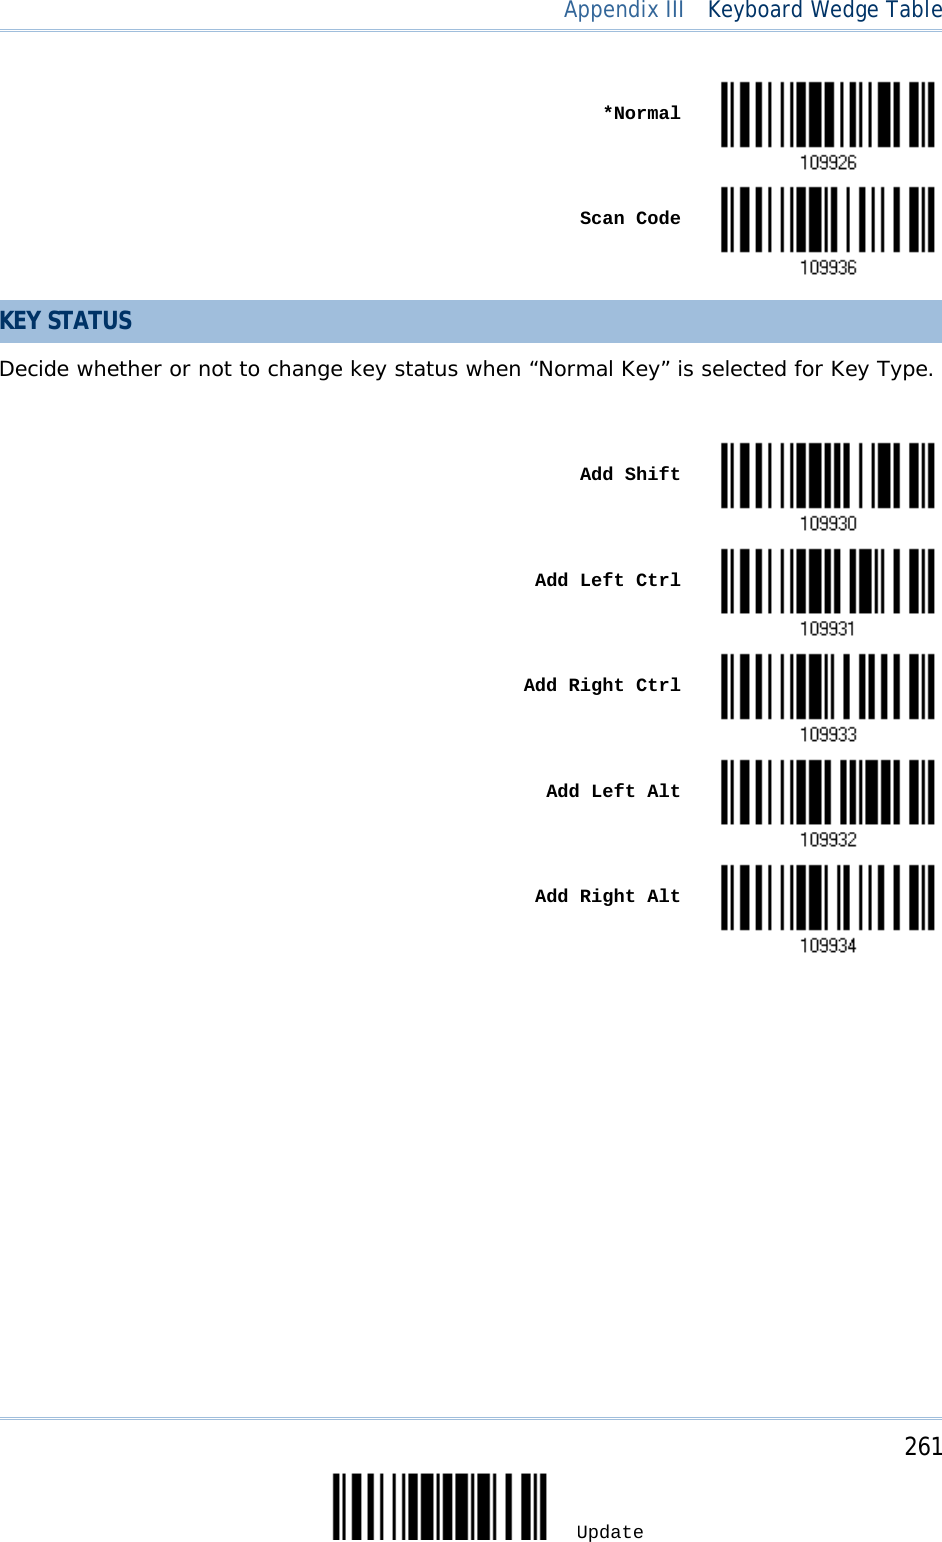  Appendix III  Keyboard Wedge Table     *Normal     Scan Code  KEY STATUS Decide whether or not to change key status when “Normal Key” is selected for Key Type.     Add Shift     Add Left Ctrl     Add Right Ctrl     Add Left Alt     Add Right Alt       261 Update 